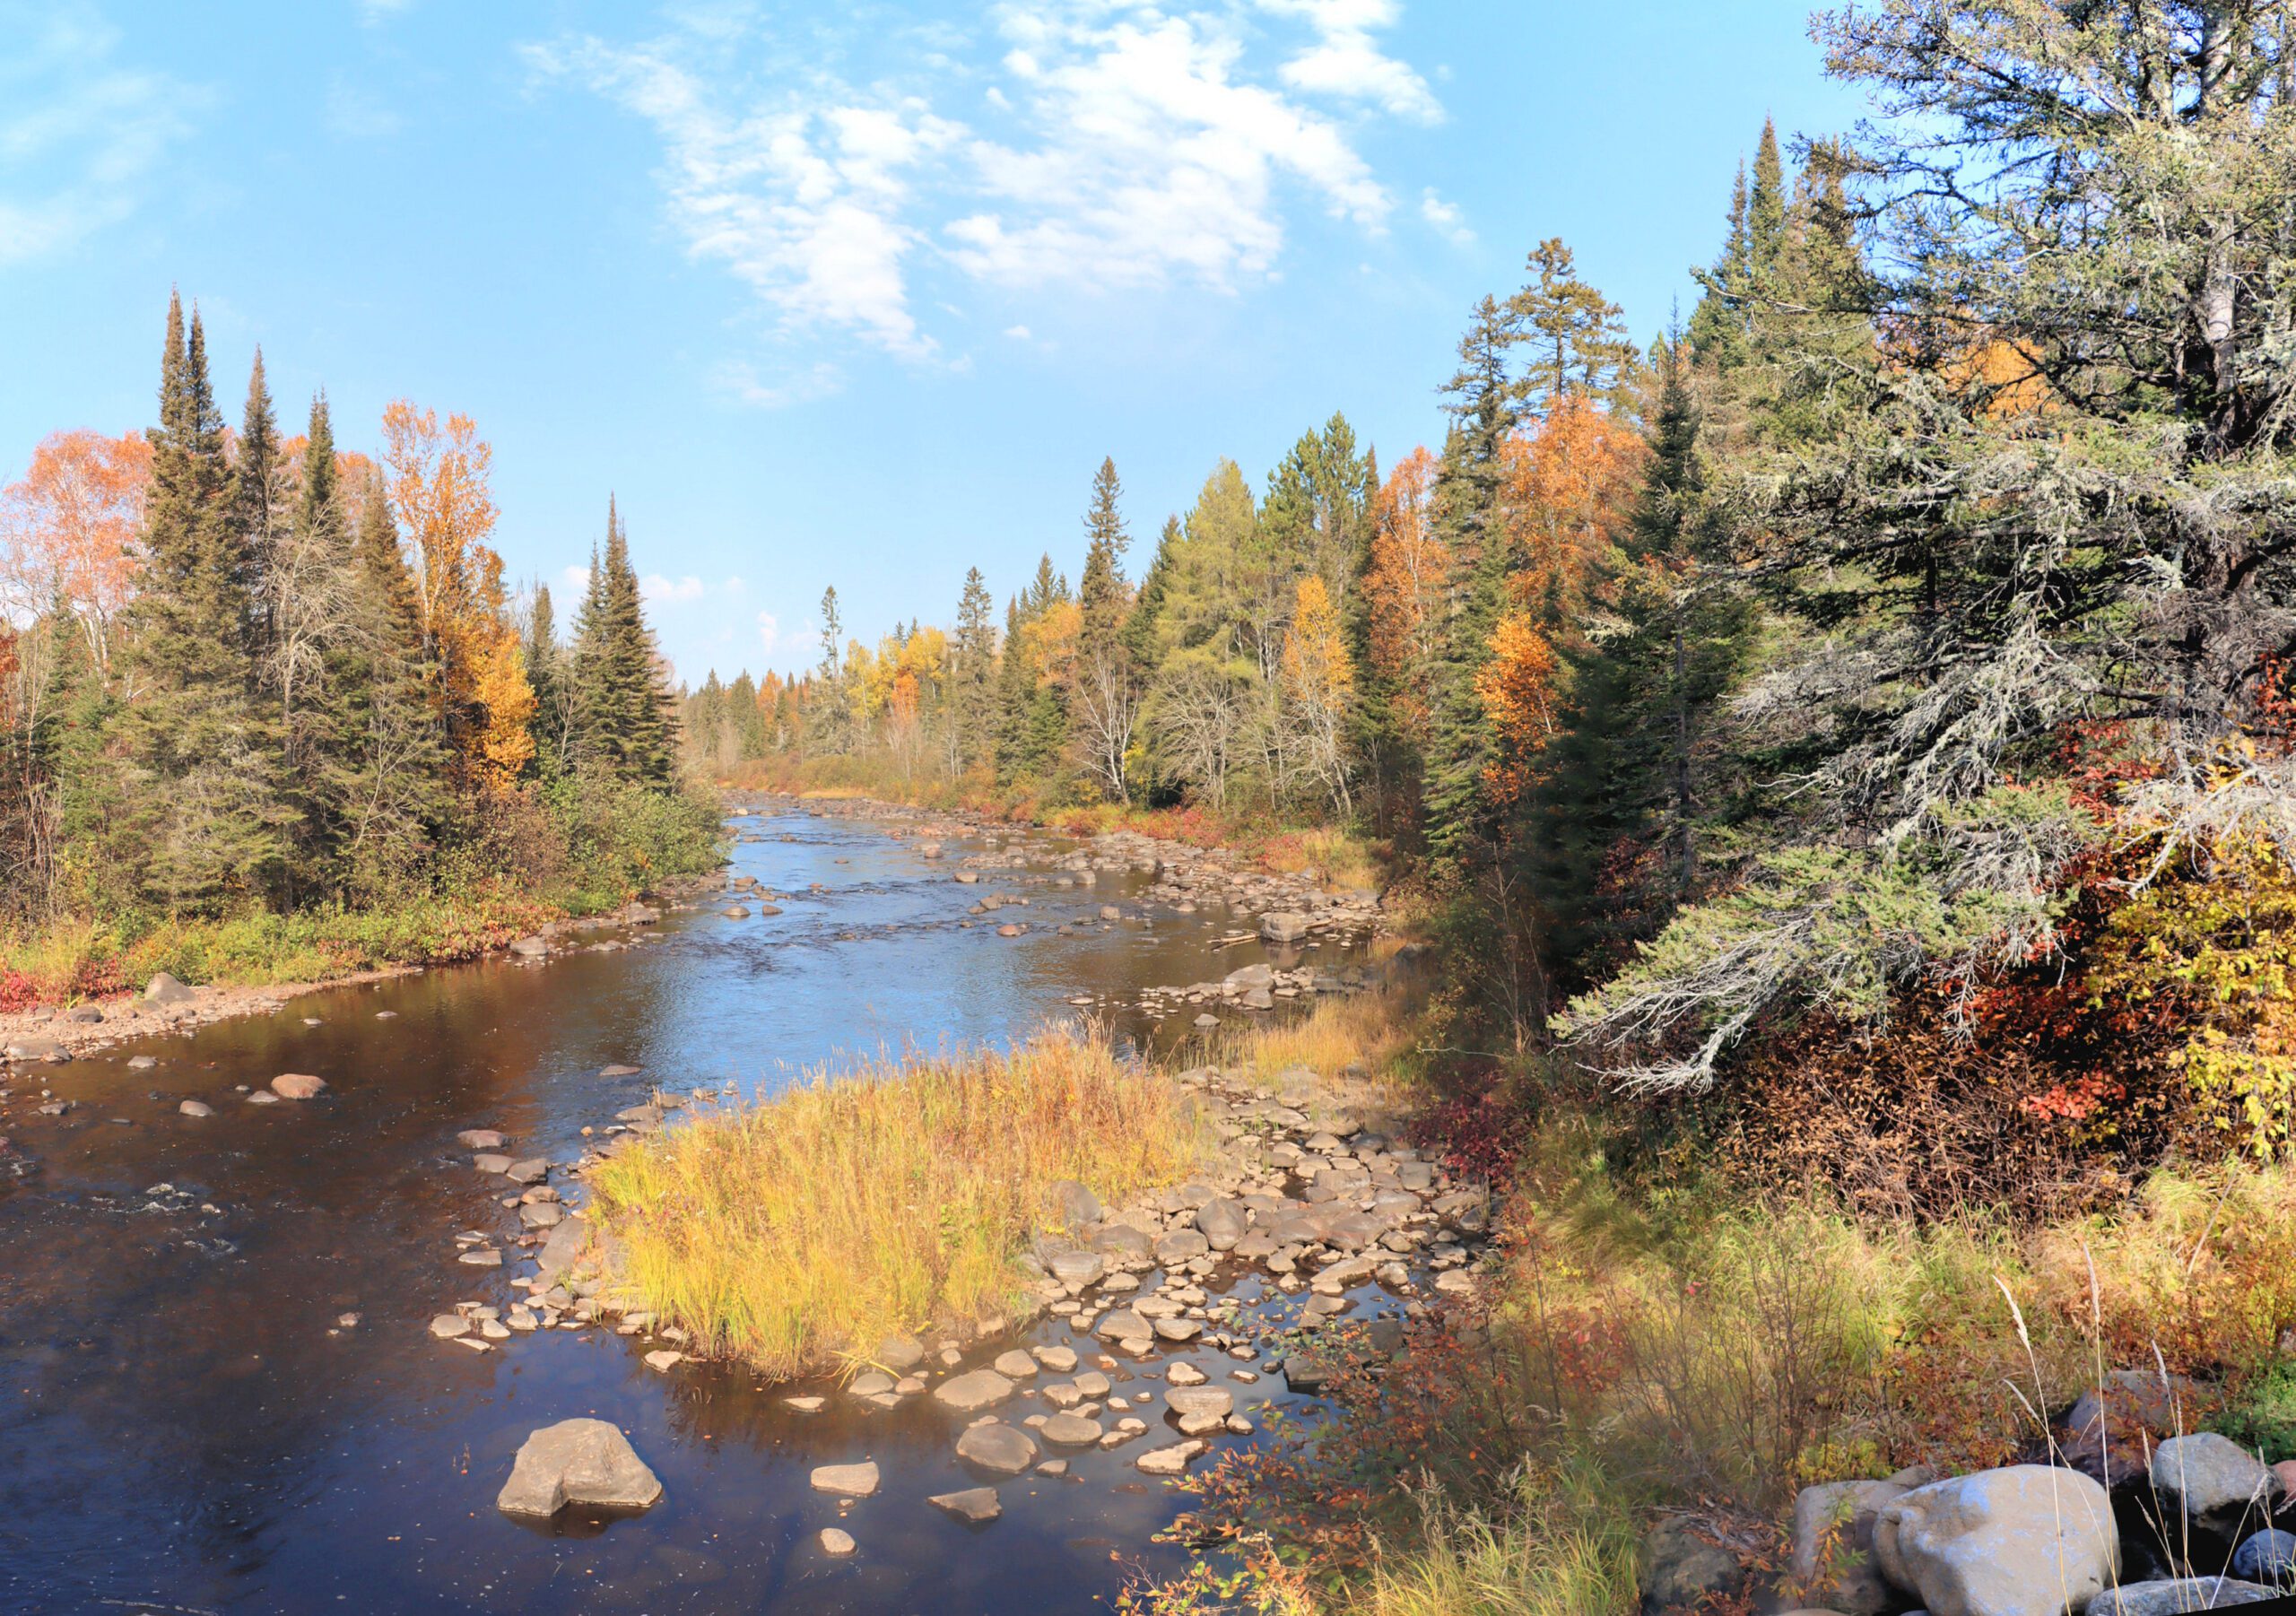 a river winds through the forest with pine and fall colors, rocks